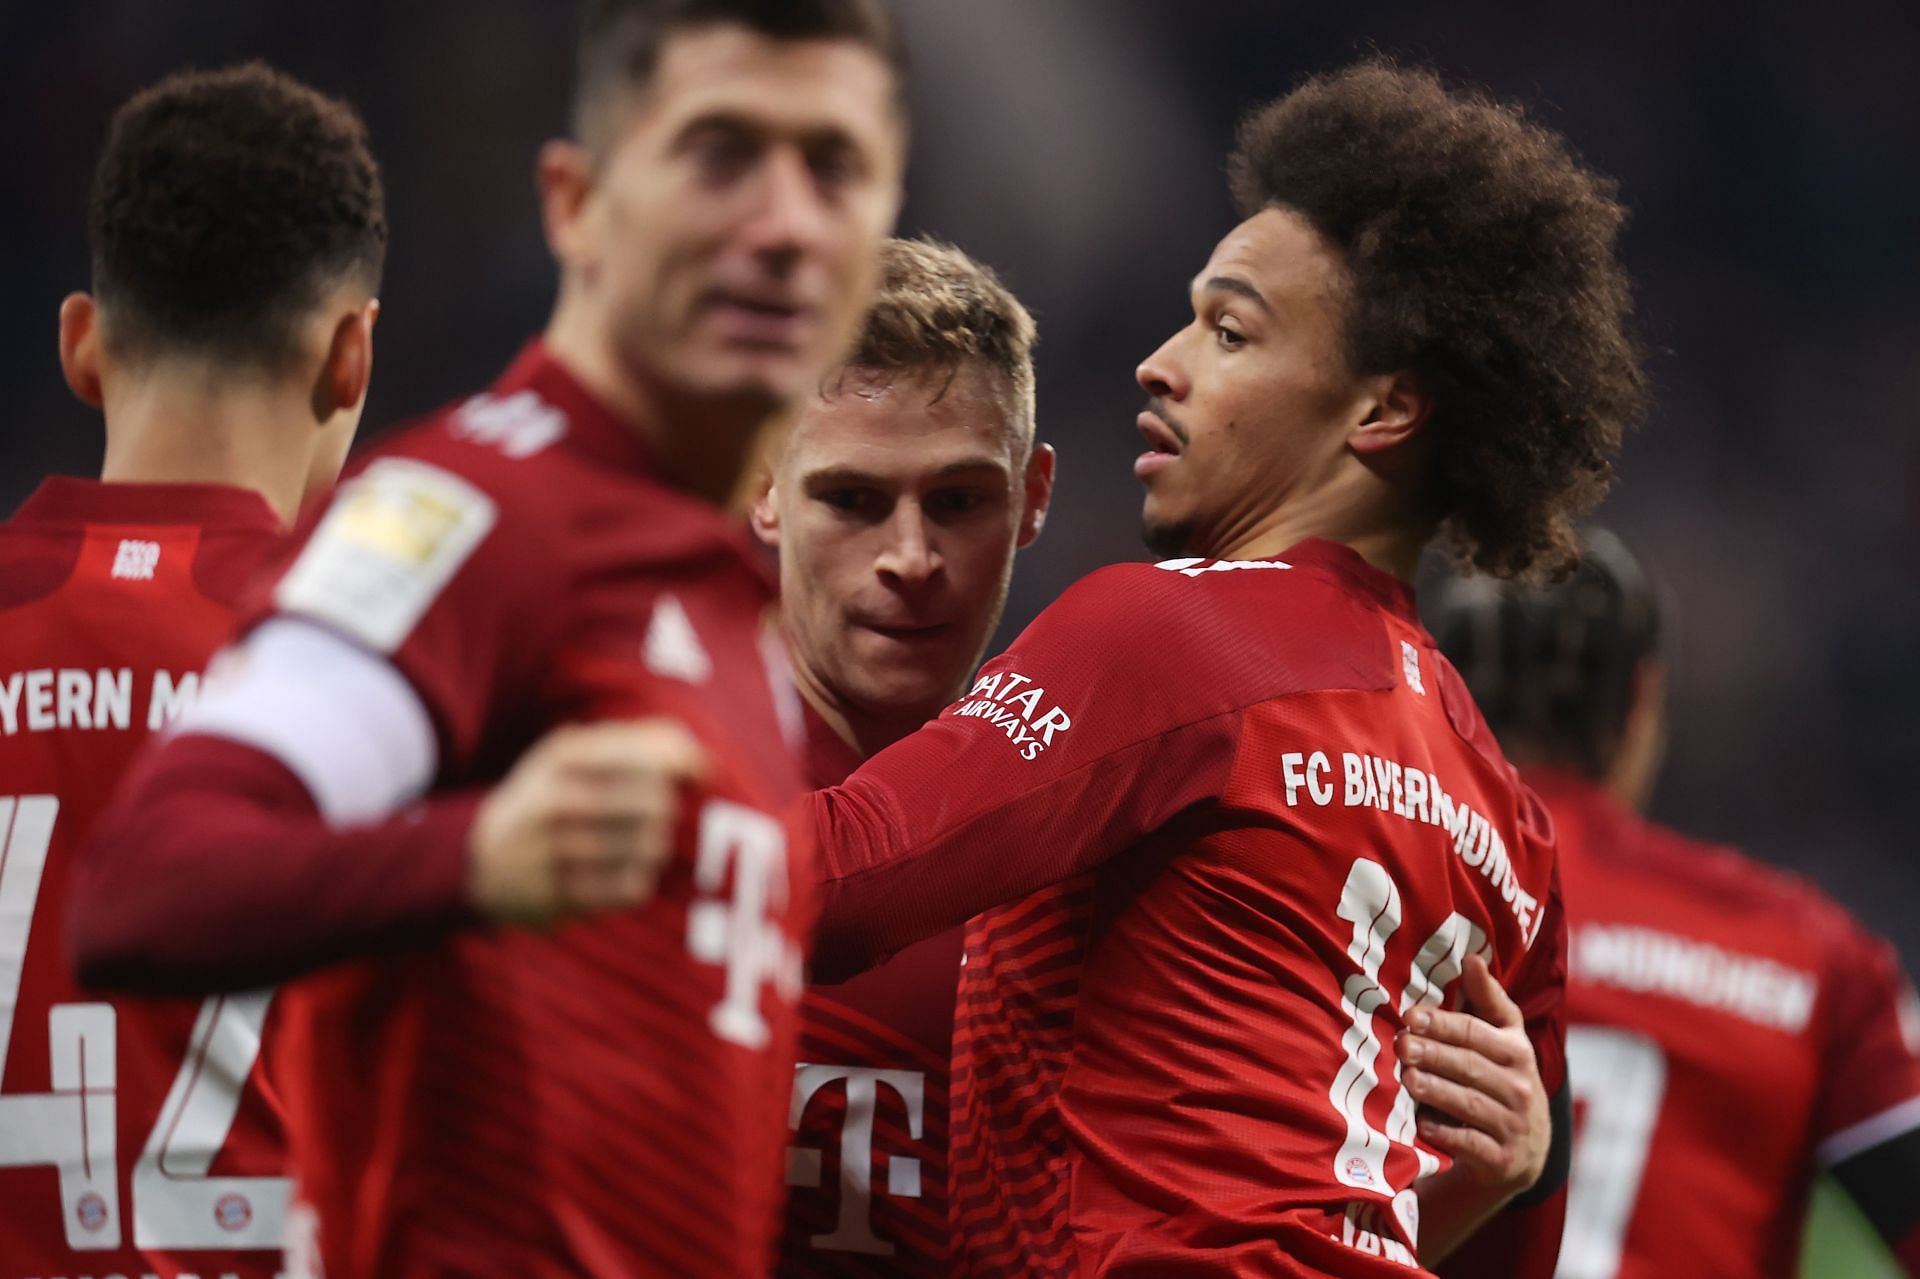 Bayern Munich could take their domination of German football to the Champions League this time